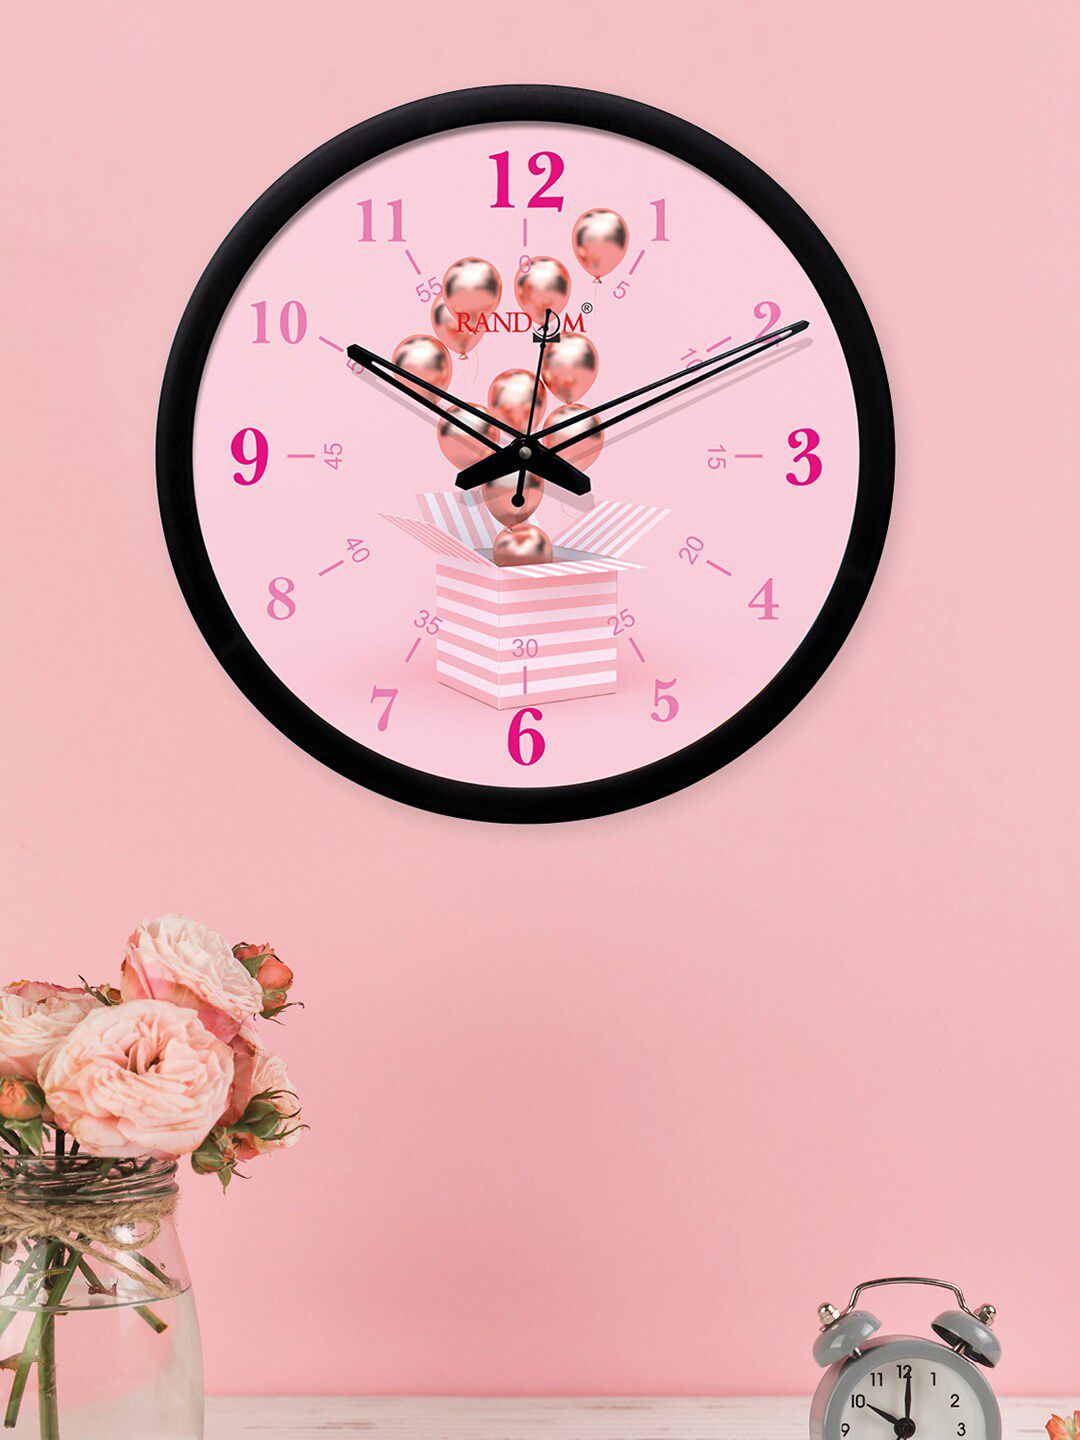 RANDOM Pink Round Printed 30 cm Analogue Wall Clock Price in India